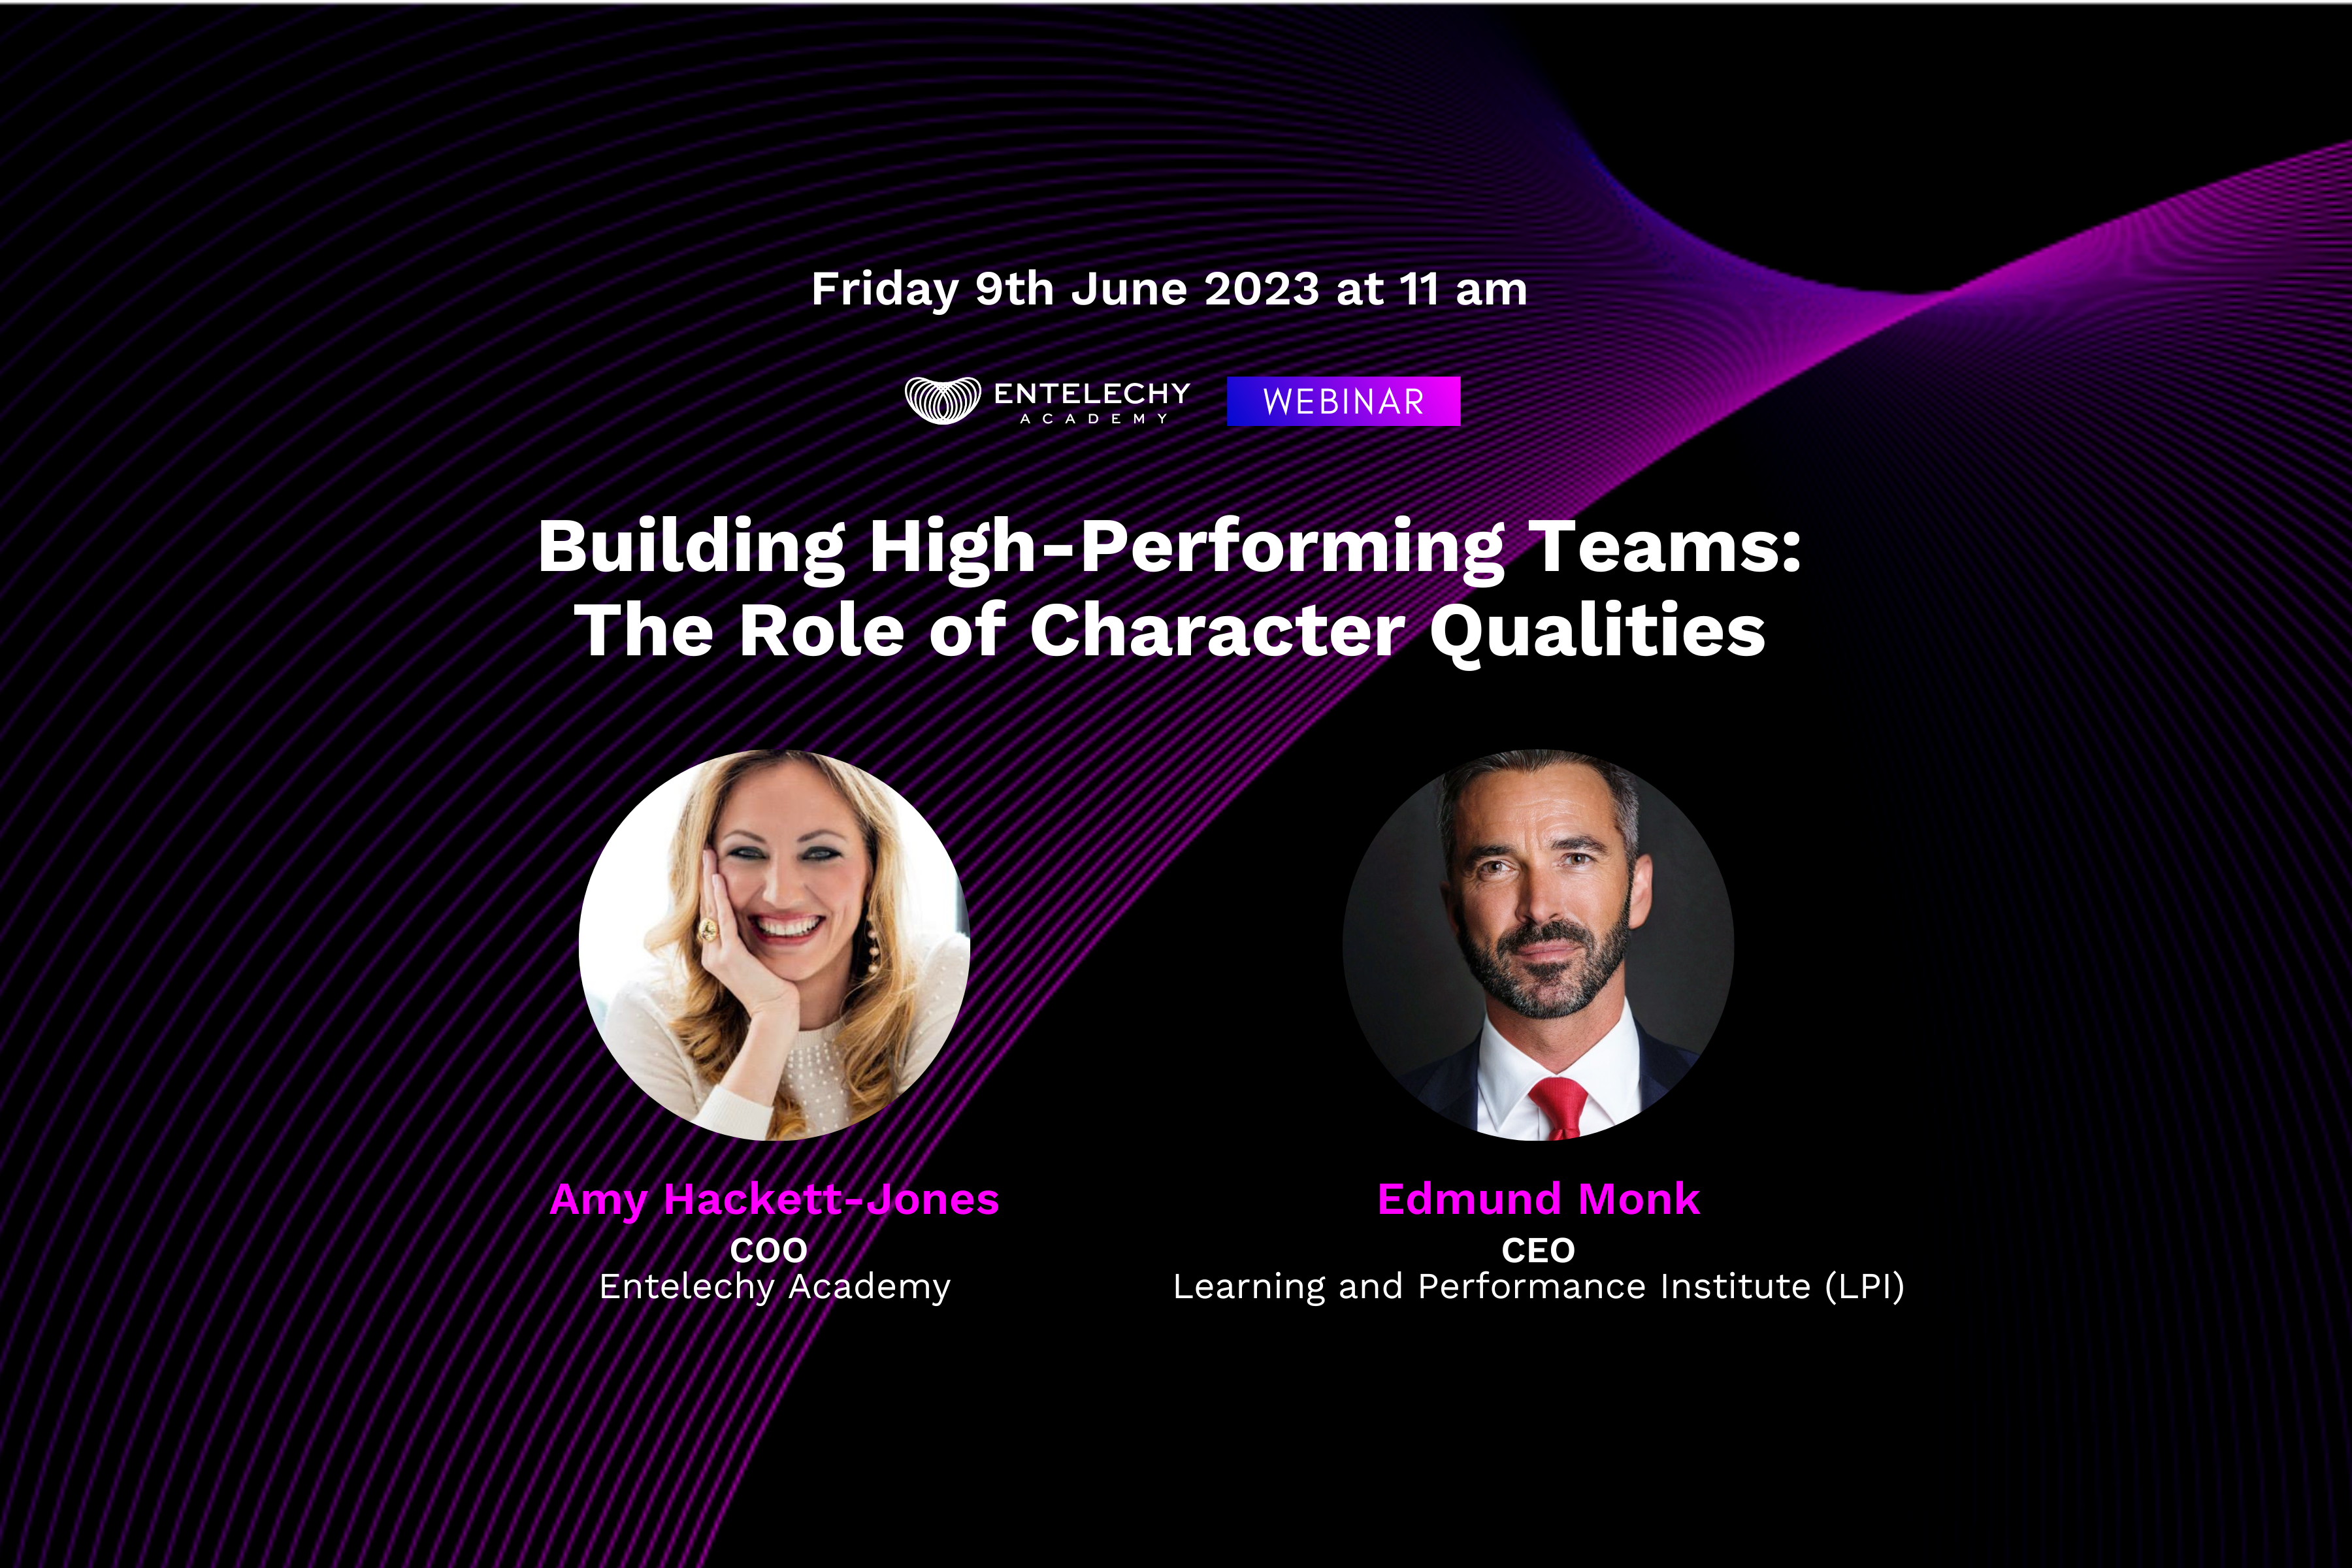 webinar 'Building High-Performing Teams: The Role of Character Qualities' featuring Amy Hackett-Jones, COO at Entelechy Academy, and Edmund Monk, CEO at the The LPI (Learning and Performance Institute)